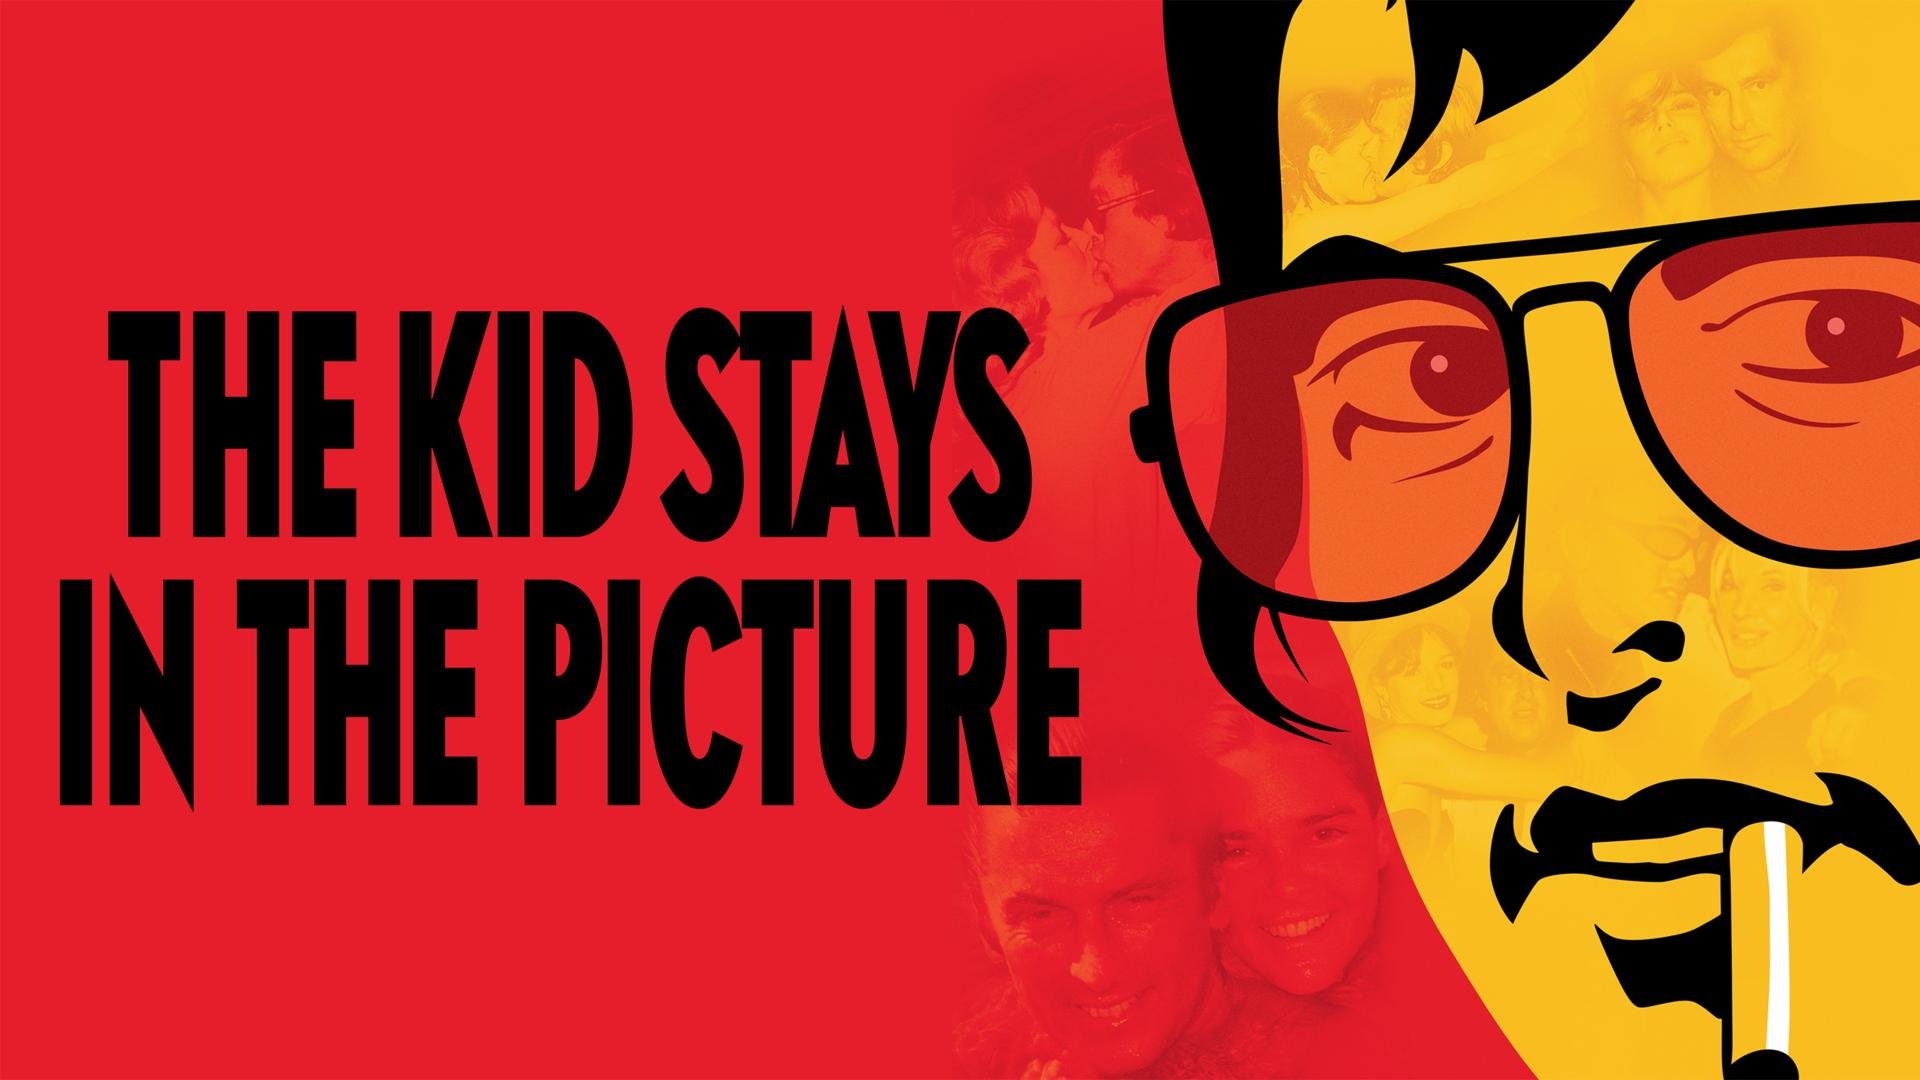 32-facts-about-the-movie-the-kid-stays-in-the-picture